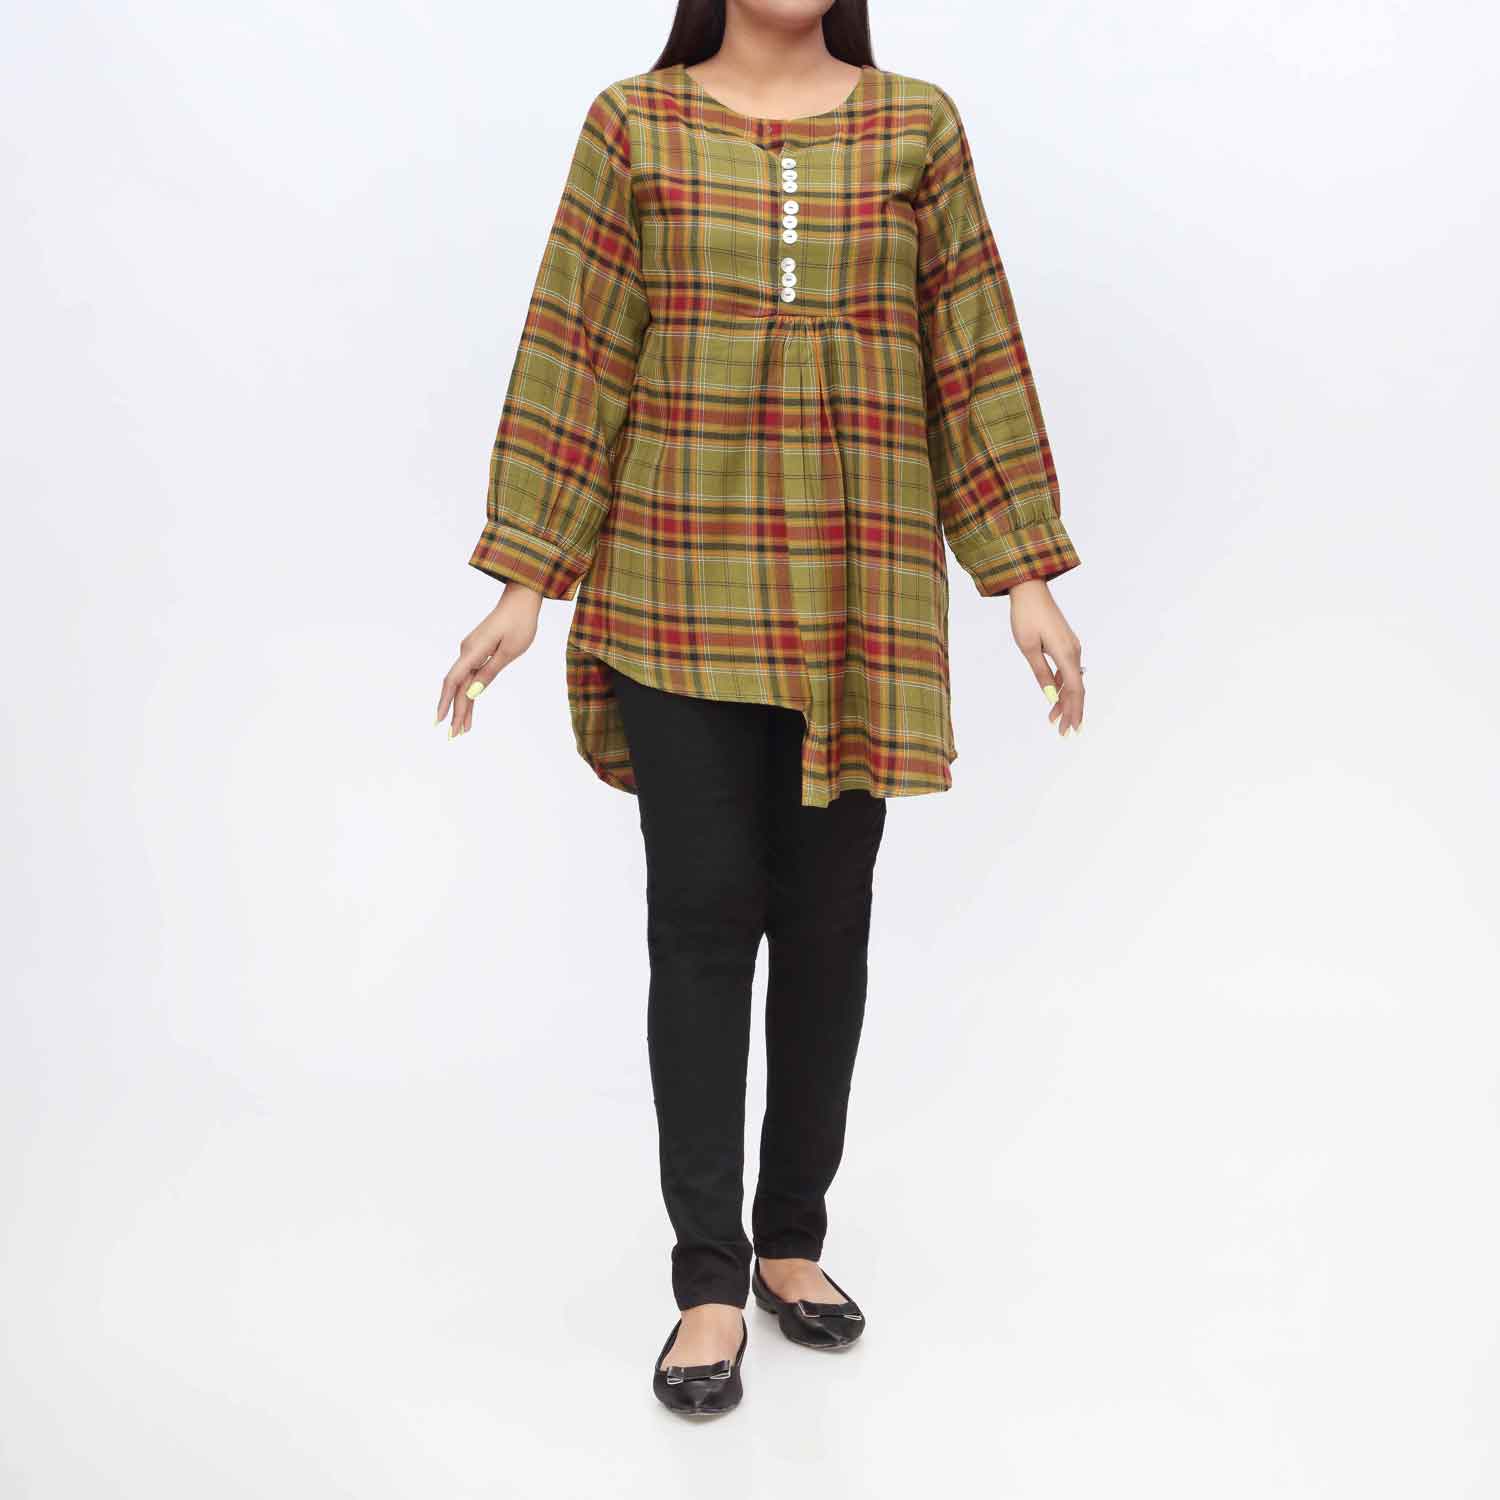 1PC- Flannel Checkered Top PW9040